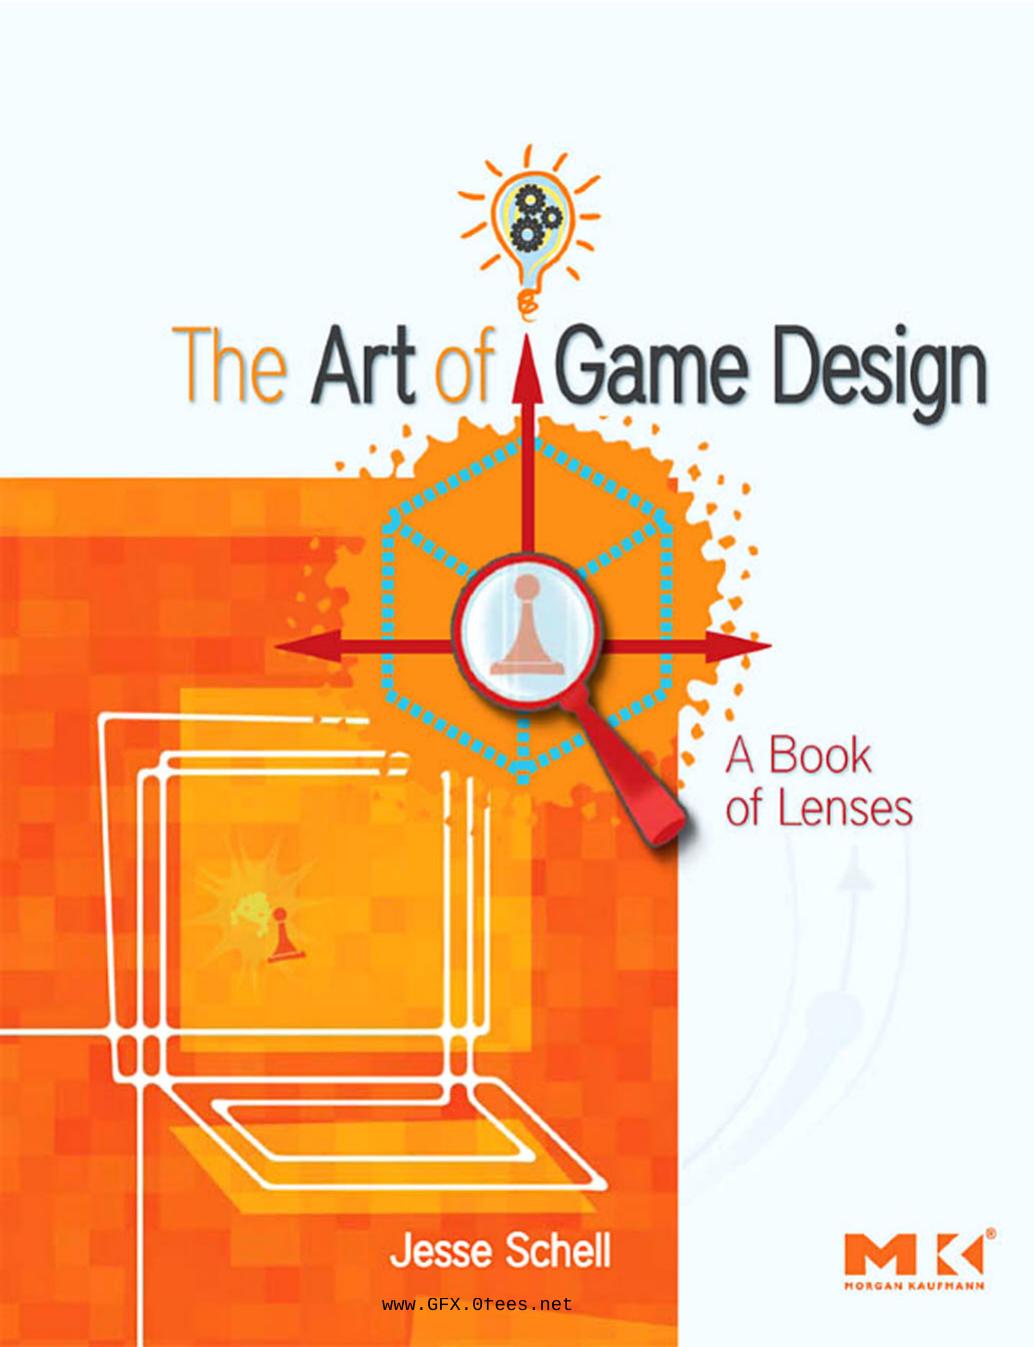 The Art of Game Design: A Book of Lenses by Jesse Schell